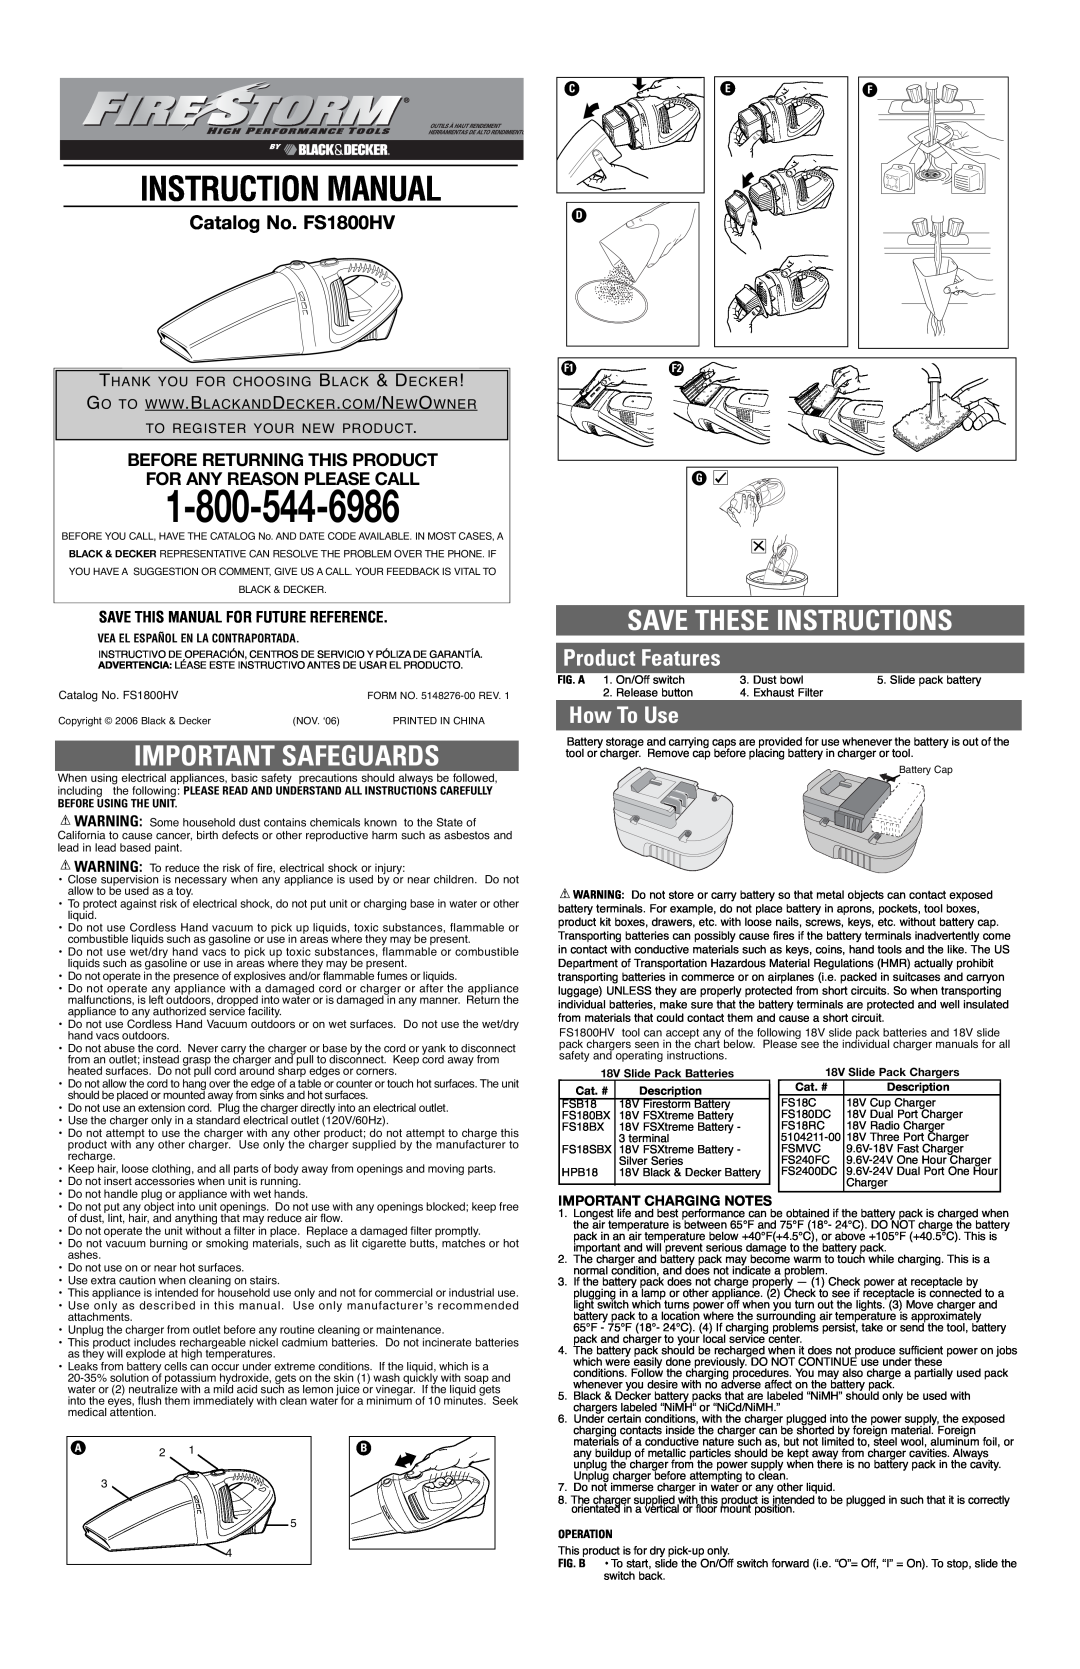 Black & Decker 5148276-00 instruction manual Important Safeguards, Save These Instructions, Product Features, How To Use 